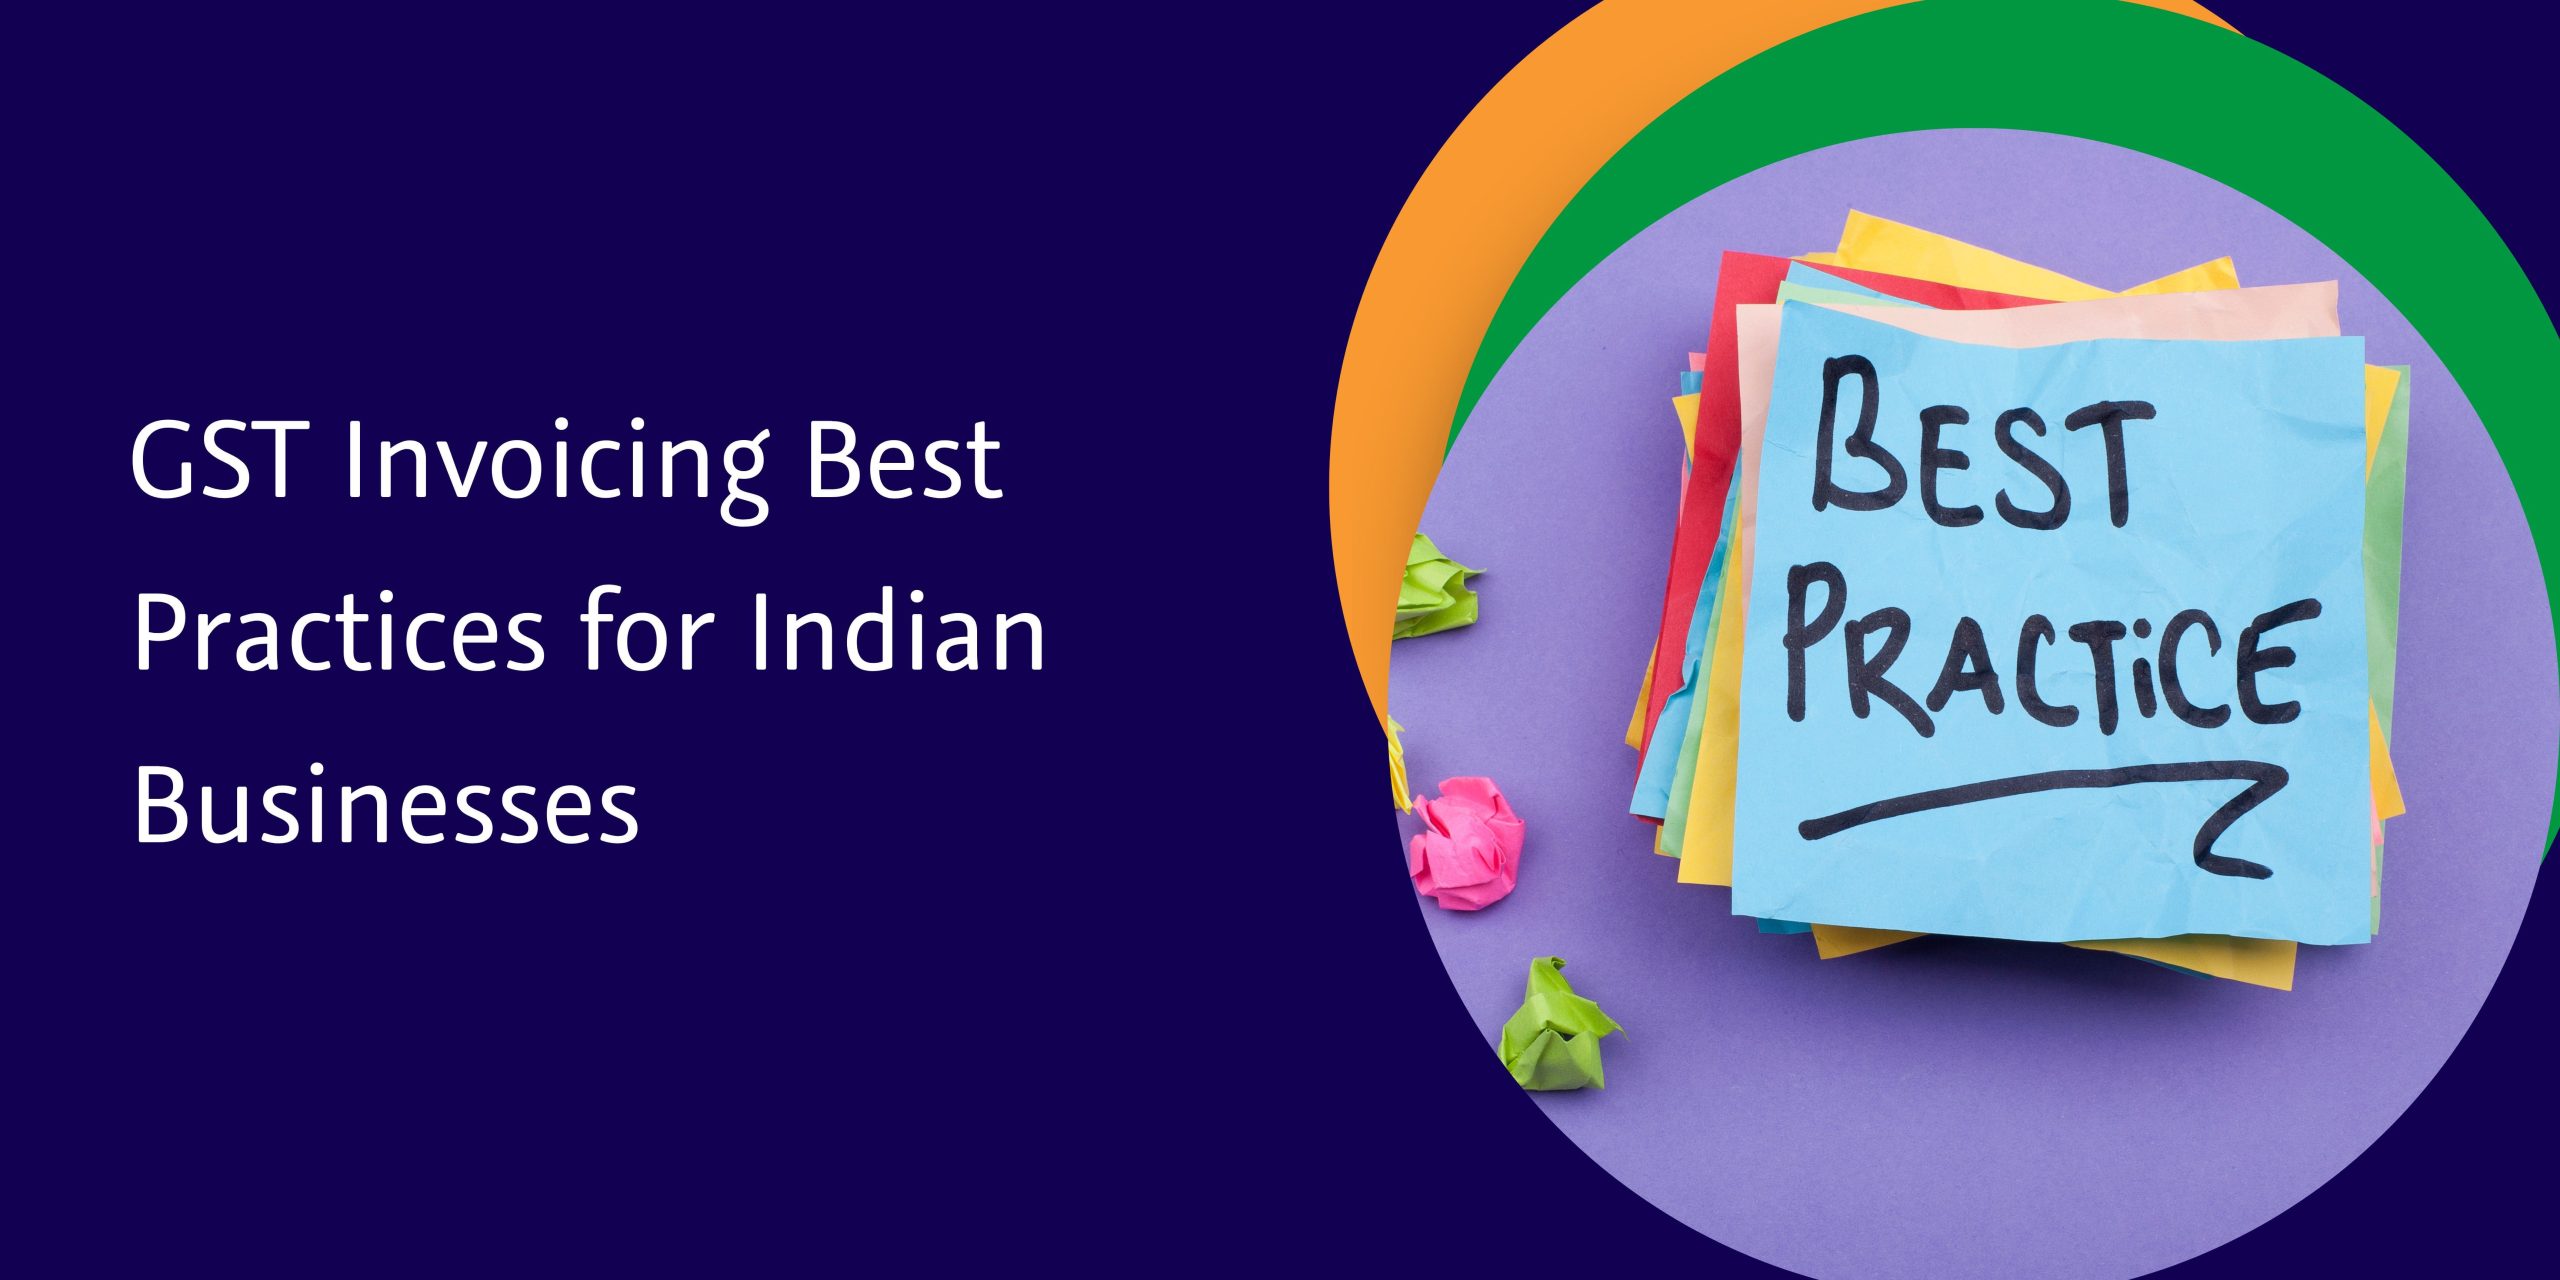 GST Invoicing Best Practices for Indian Businesses